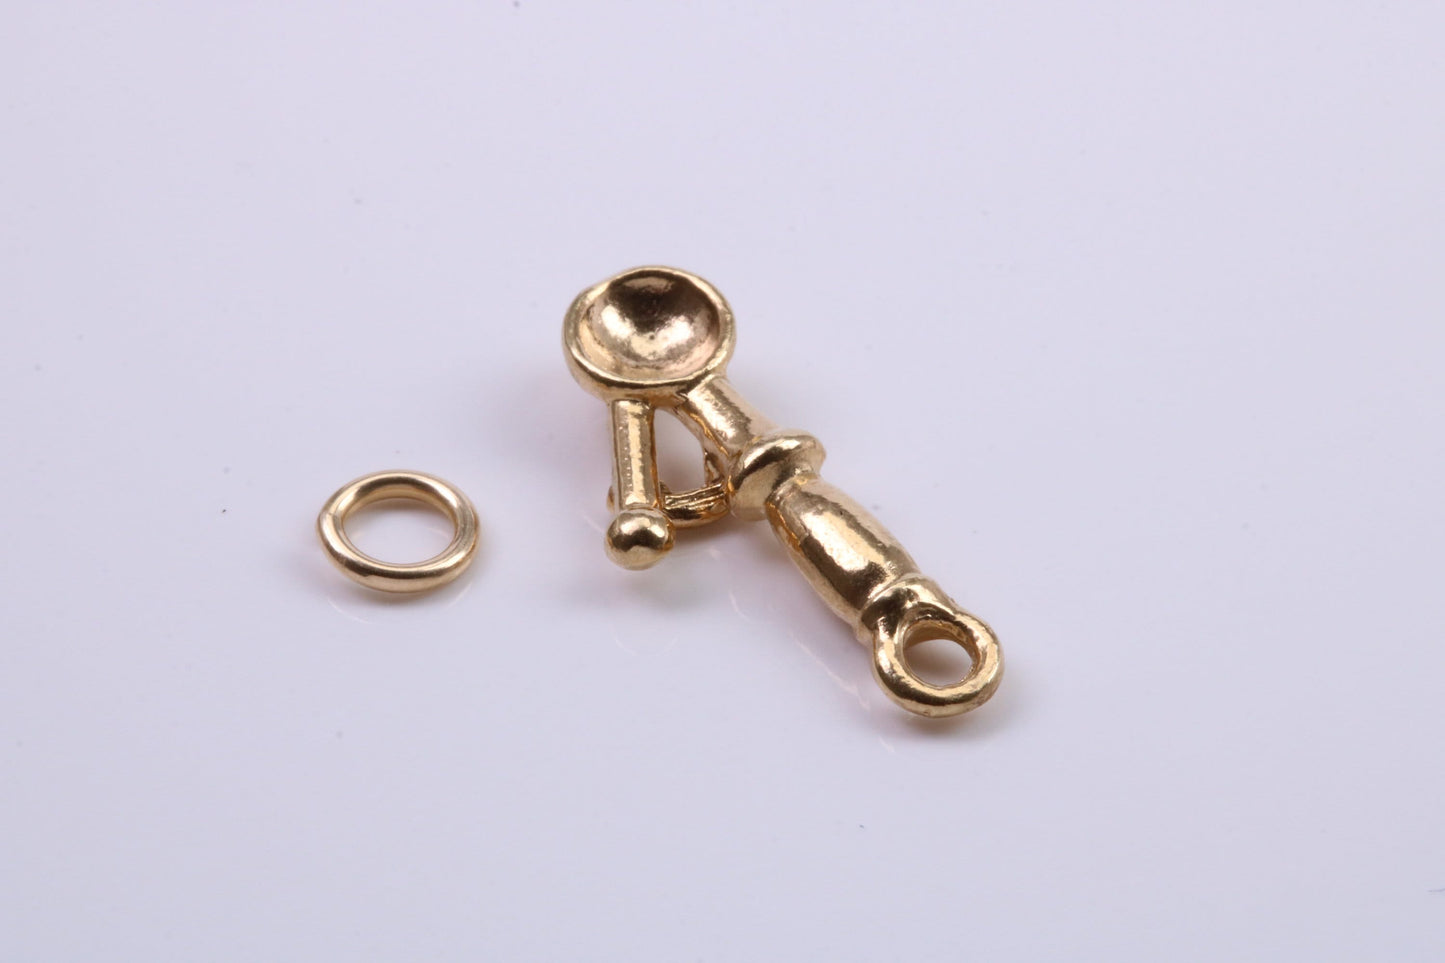 Ice Cream Scooper Charm, Traditional Charm, Made from Solid 9ct Yellow Gold, British Hallmarked, Complete with Attachment Link